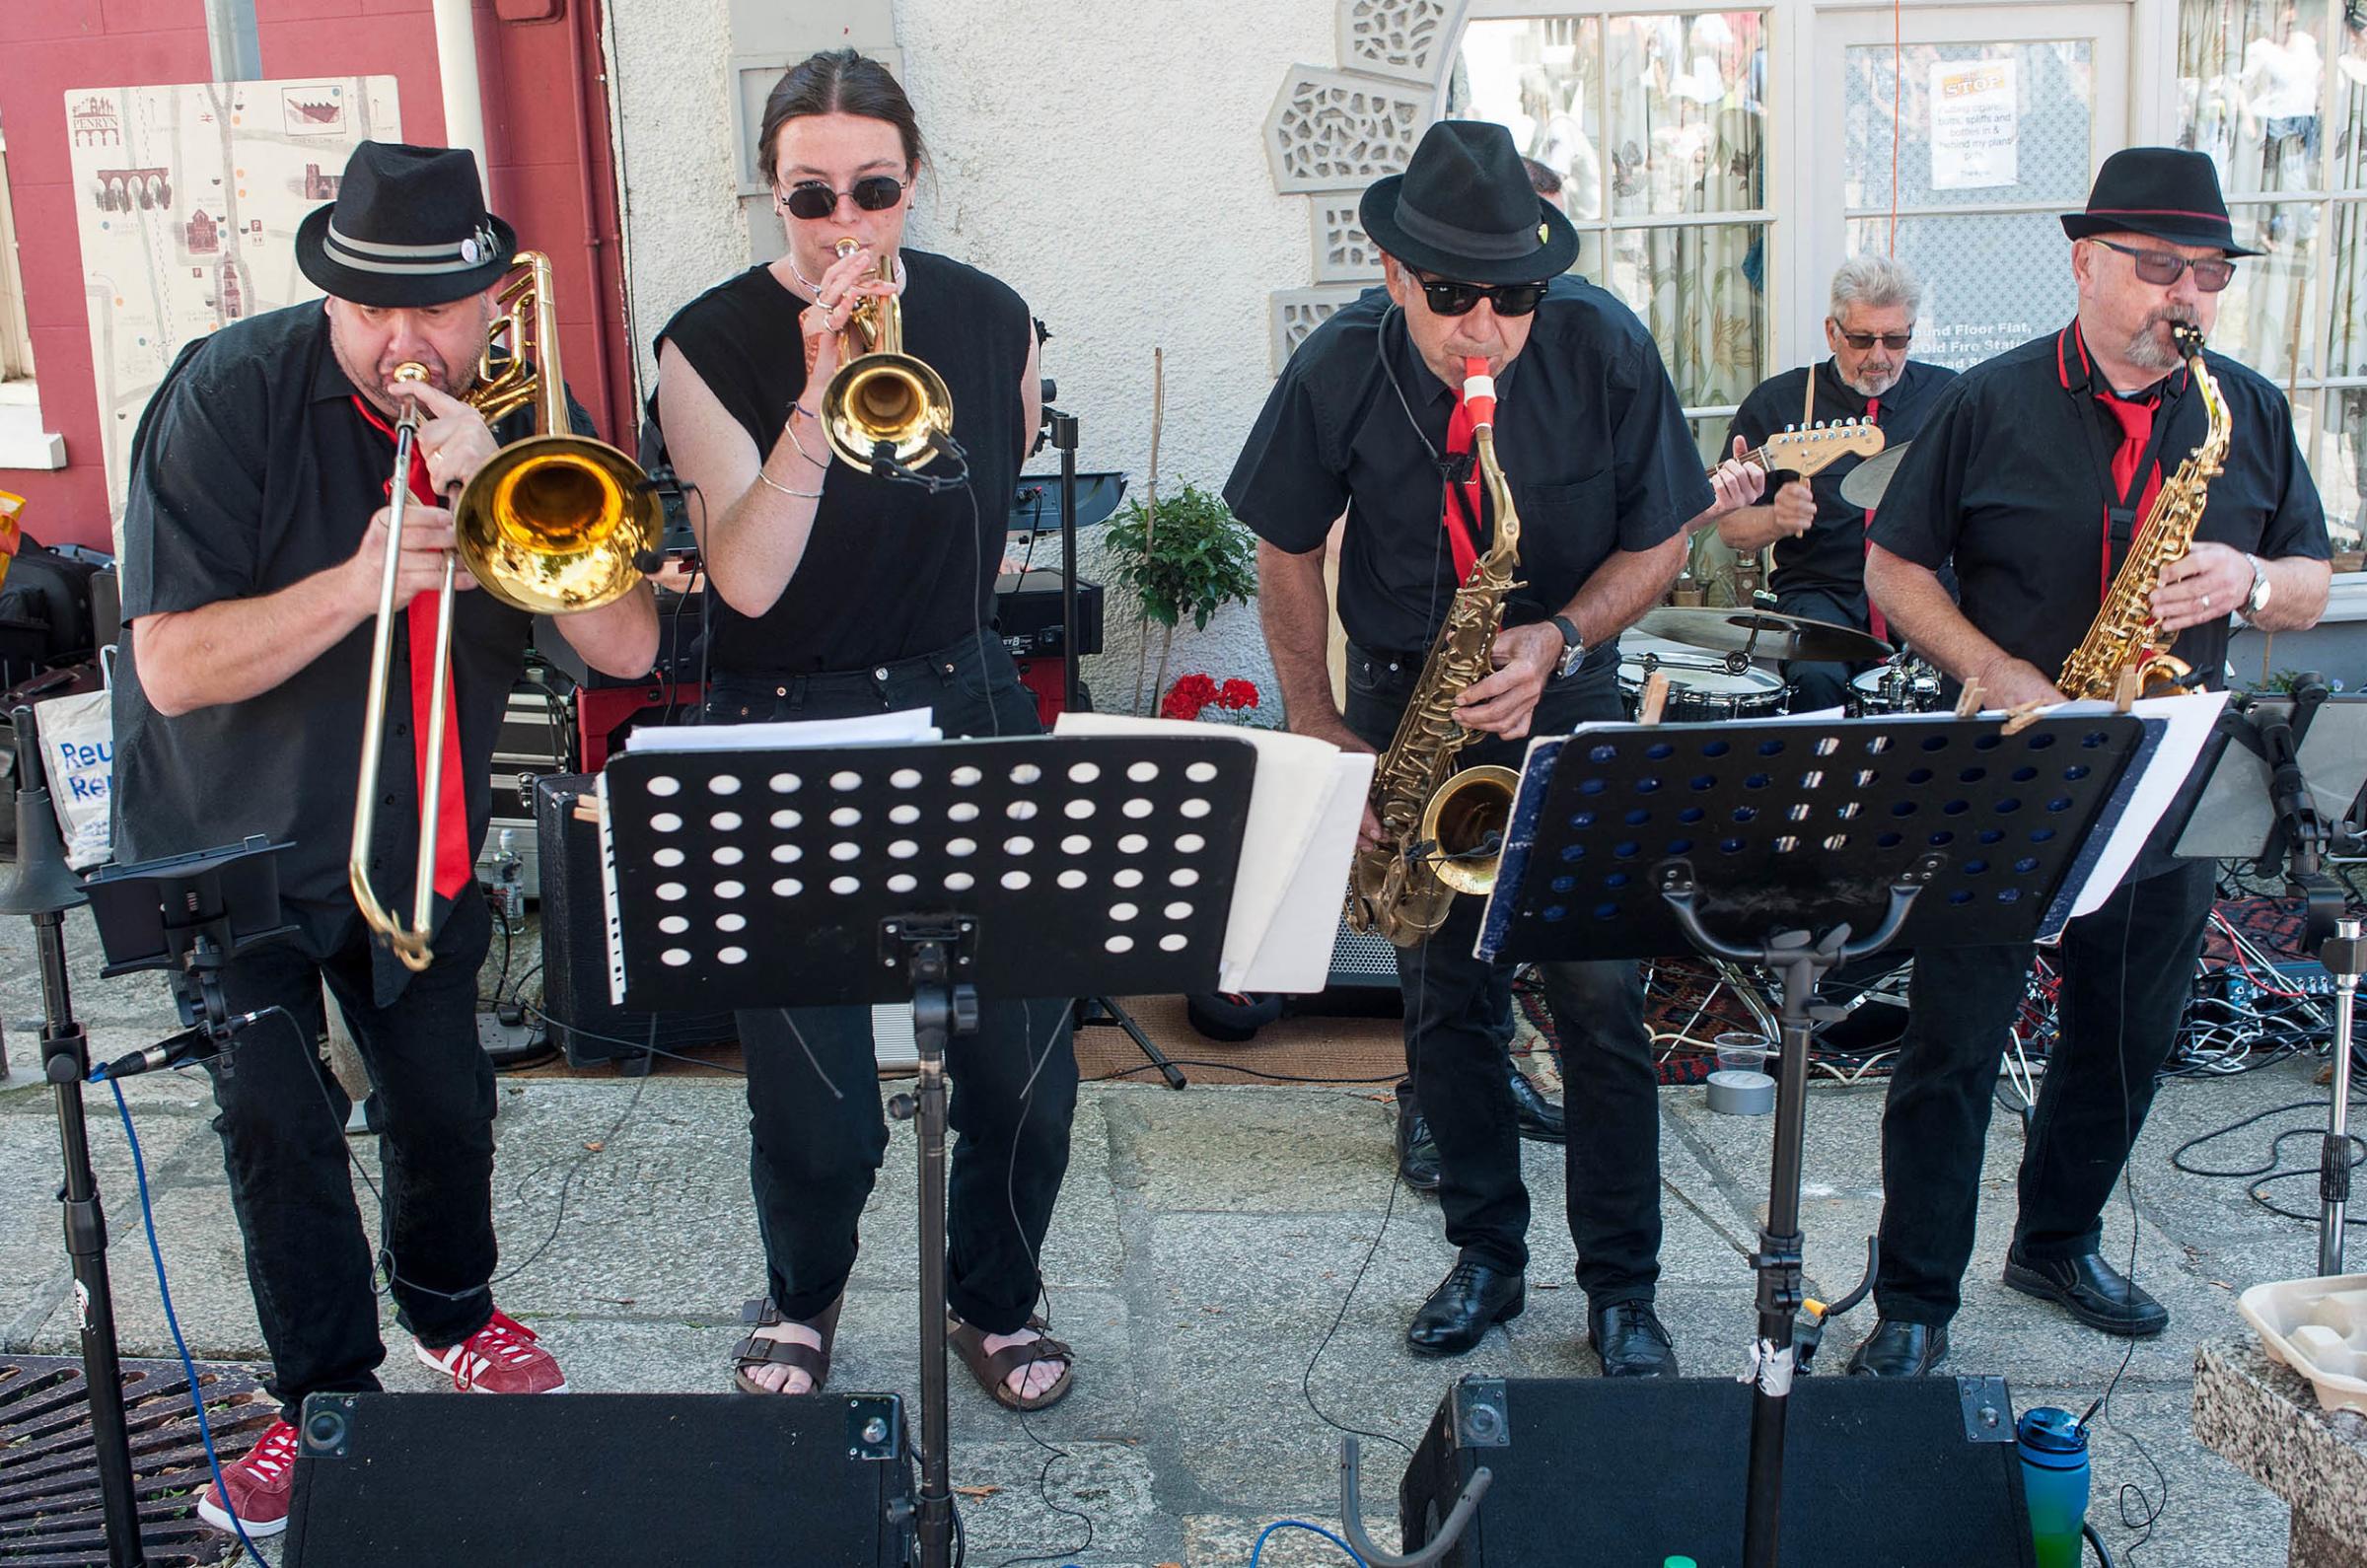 Falmouth Soul Sensation played throughout the day at Fish Cross. Picture by Colin Higgs